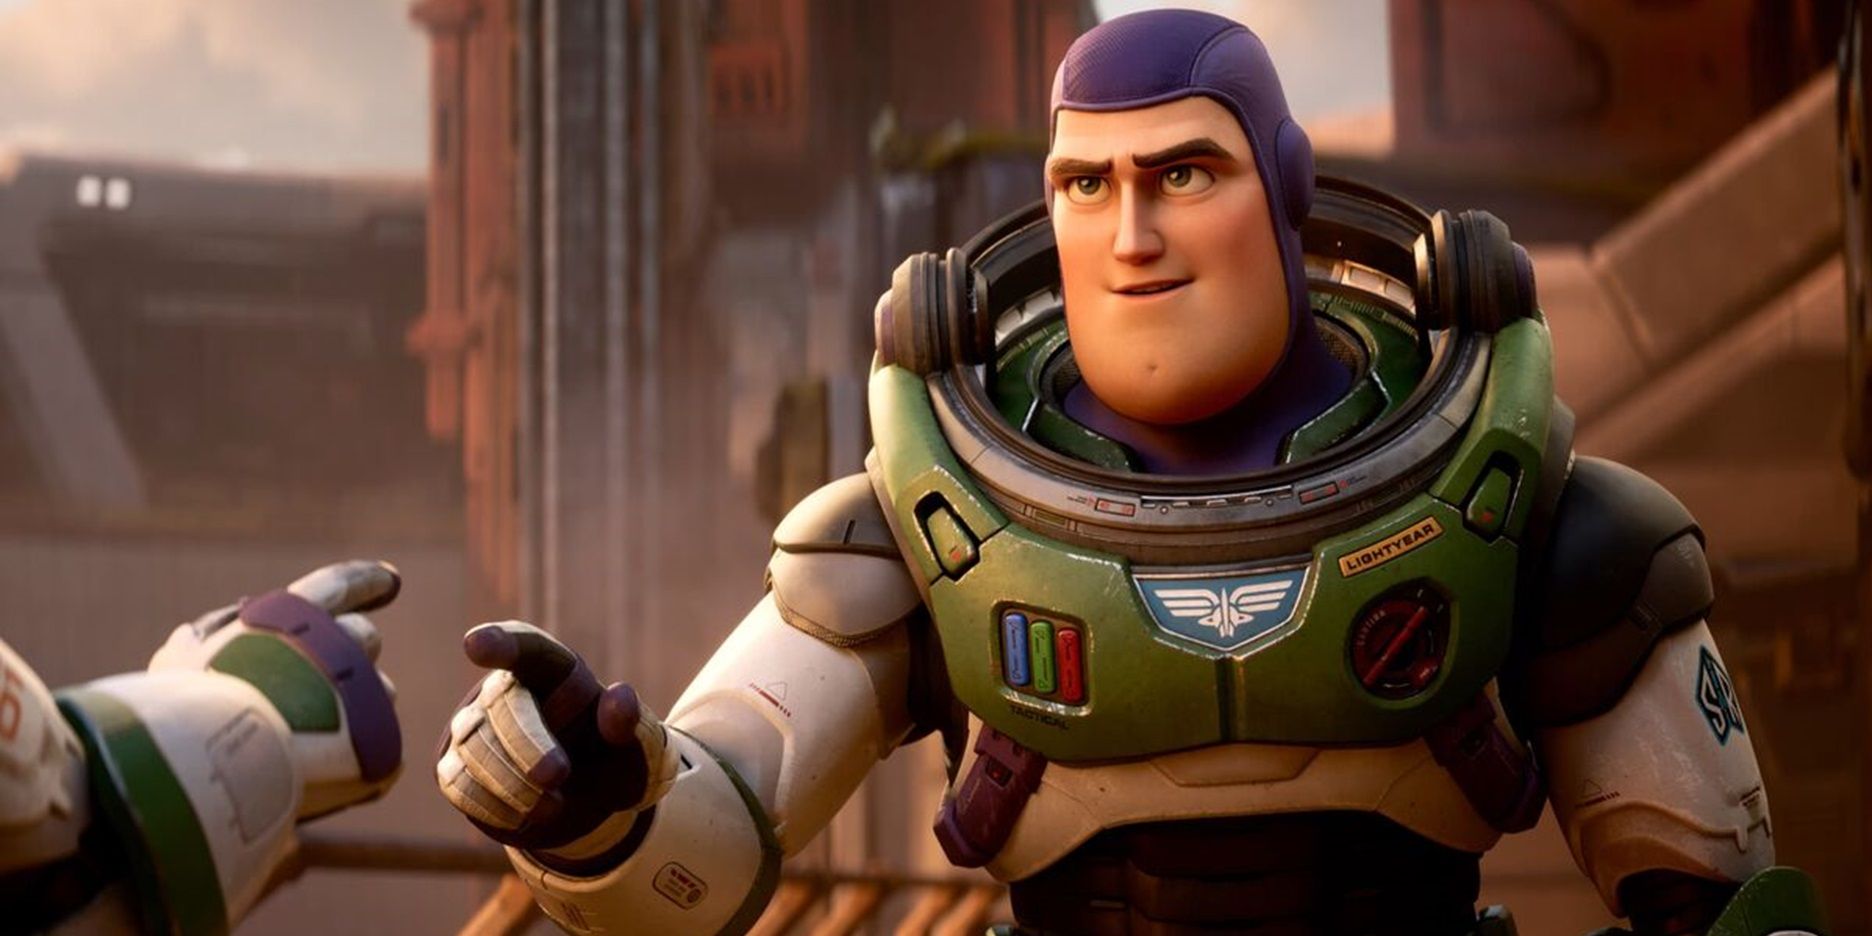 Buzz reaching out in Lightyear